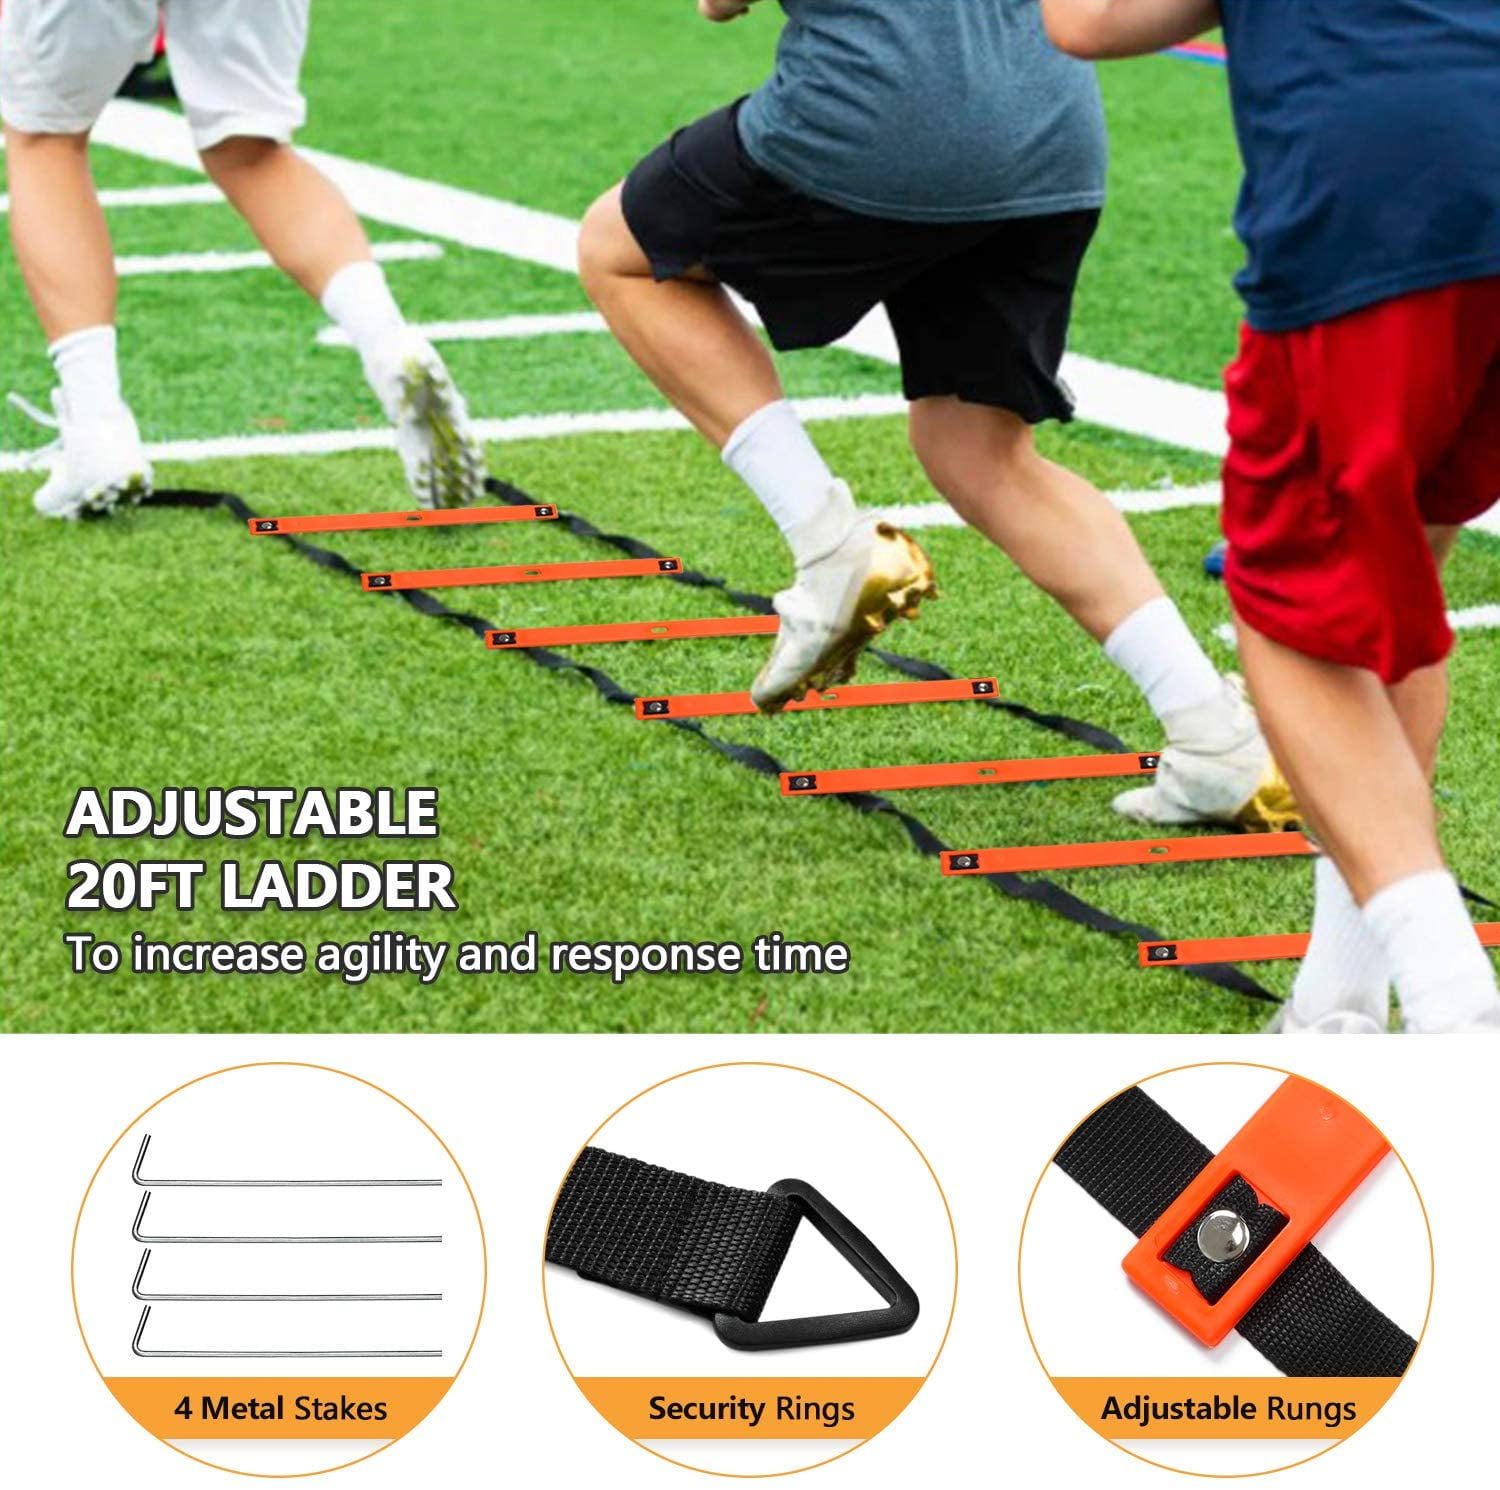 Includes Ladder Running Parachute skonhed Sports Speed Agility Training Set Jump Rope and Hurdles for Training Football Soccer Resistance Bands and Basketball Athletes 24Cones with Holder 